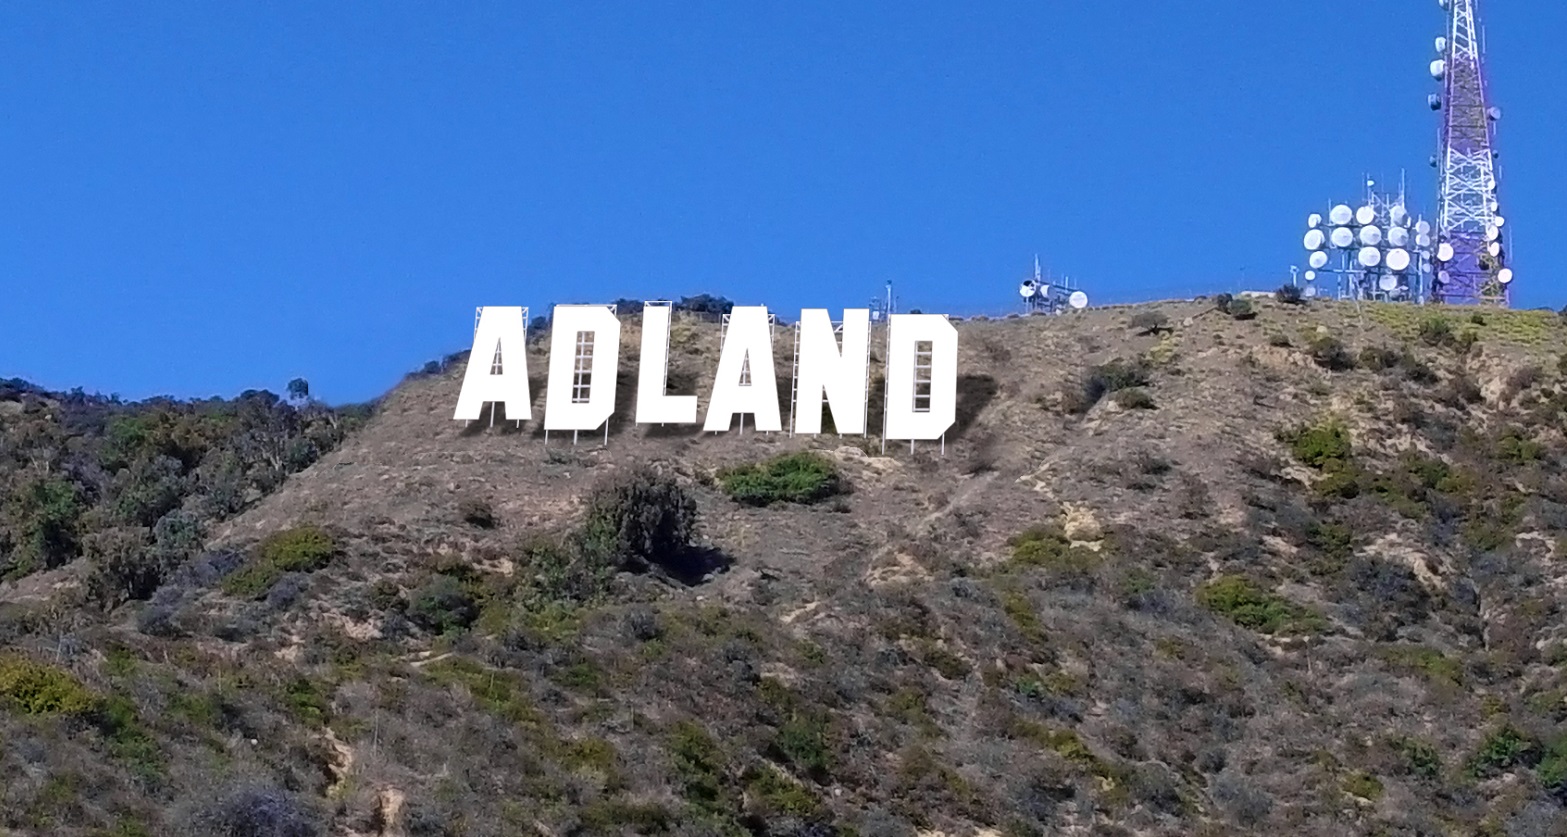 Adland vs Hollywood: What the Advertising Industry Can Learn from the Mistakes of 1960s Hollywood and the Success of The Godfather